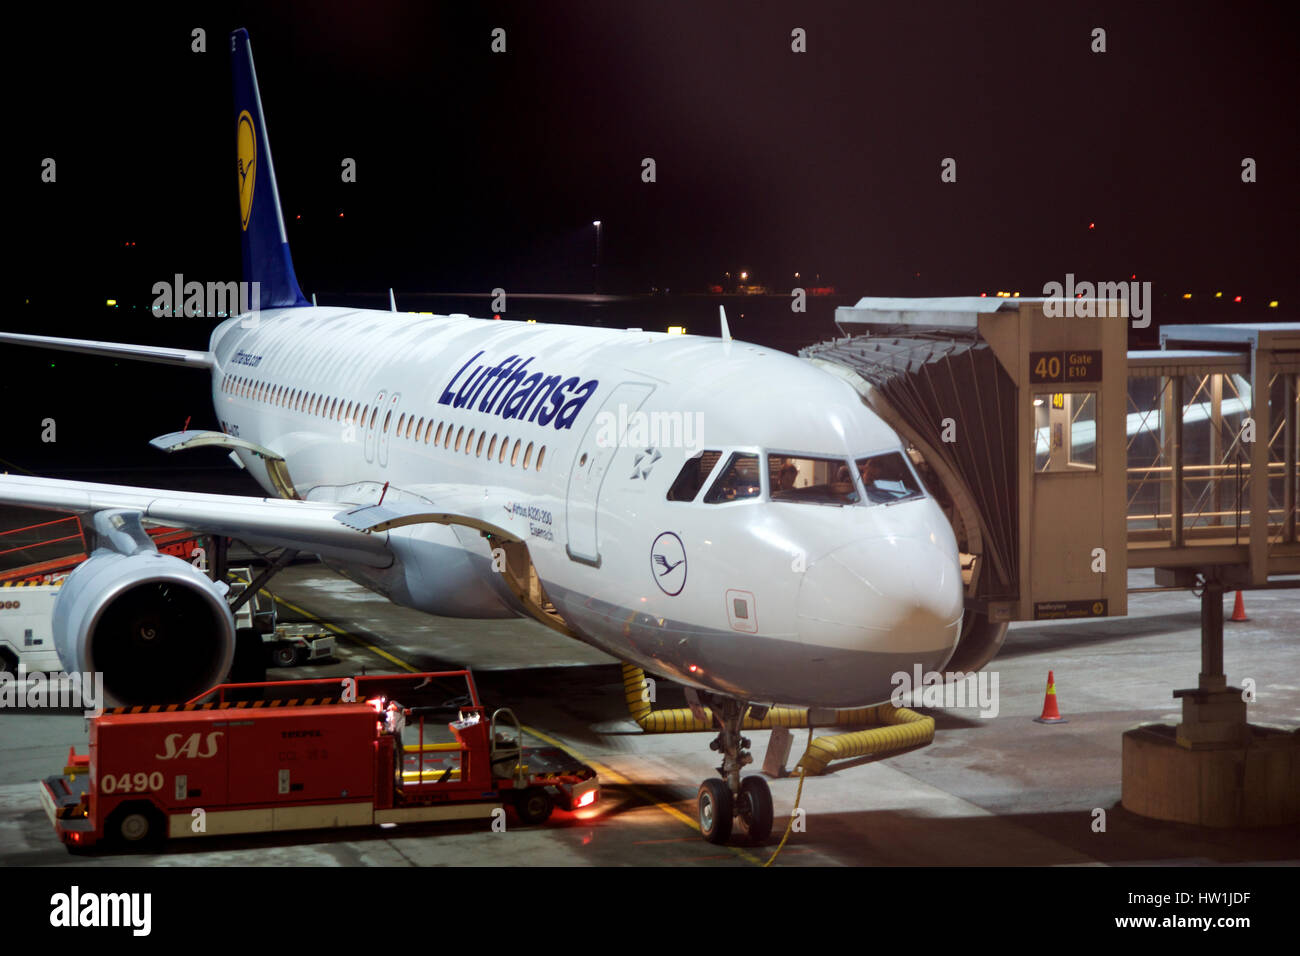 OSLO, NORWAY - JAN 21st, 2017: Lufthansa Airbus A320 airplane at the gate ready for boarding, early in the morning during winter. Stock Photo